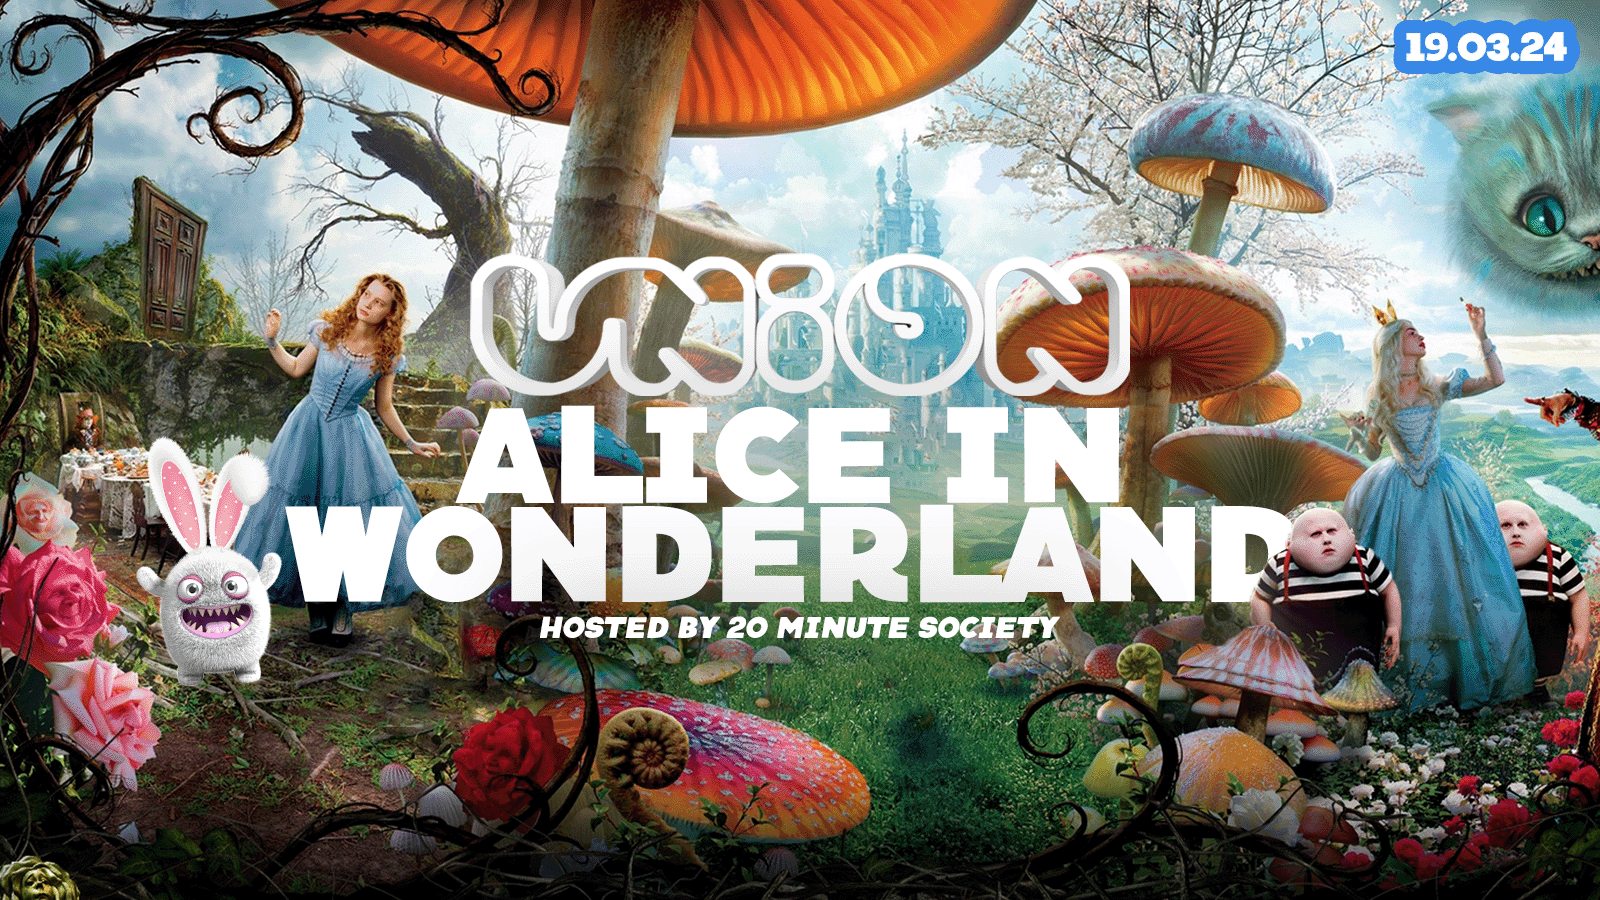 UNION TUESDAY’S // 🍄 ALICE IN WONDERLAND 🍄 // Hosted by UoL 20 Minute Society